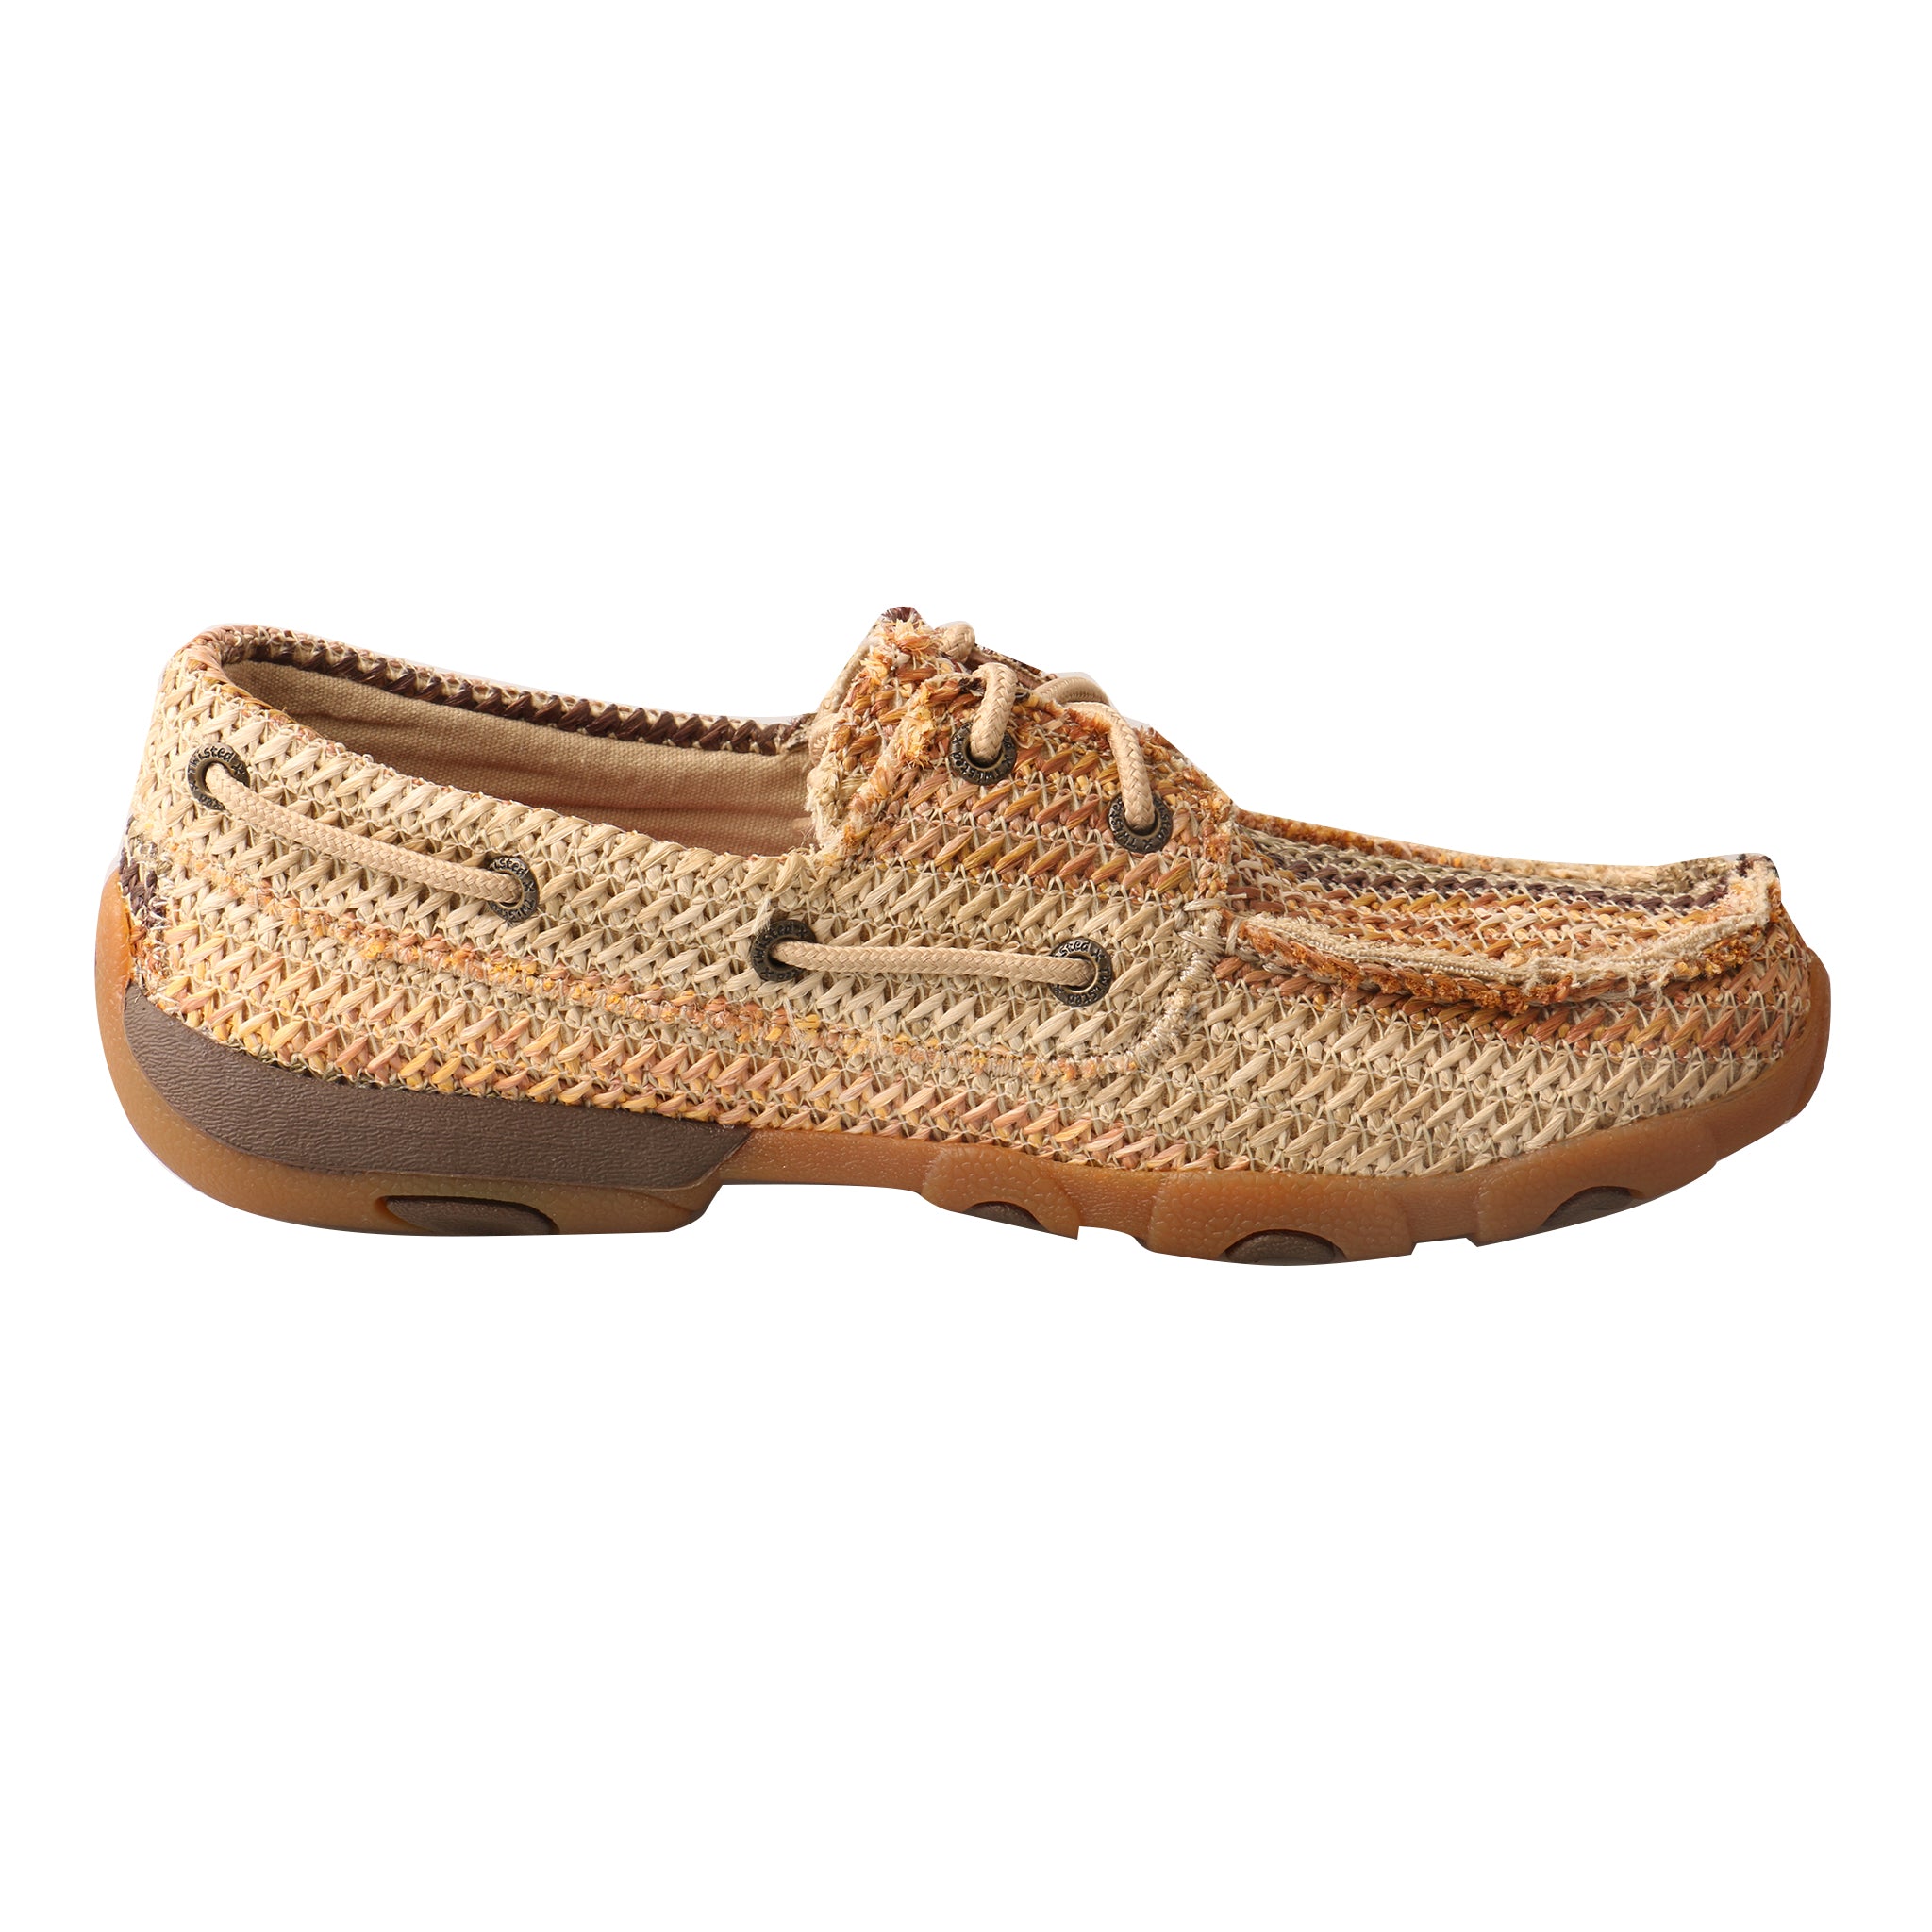 'Twisted X' WDM0084 - Weave Driving Moccasin - Multi Earth Tones